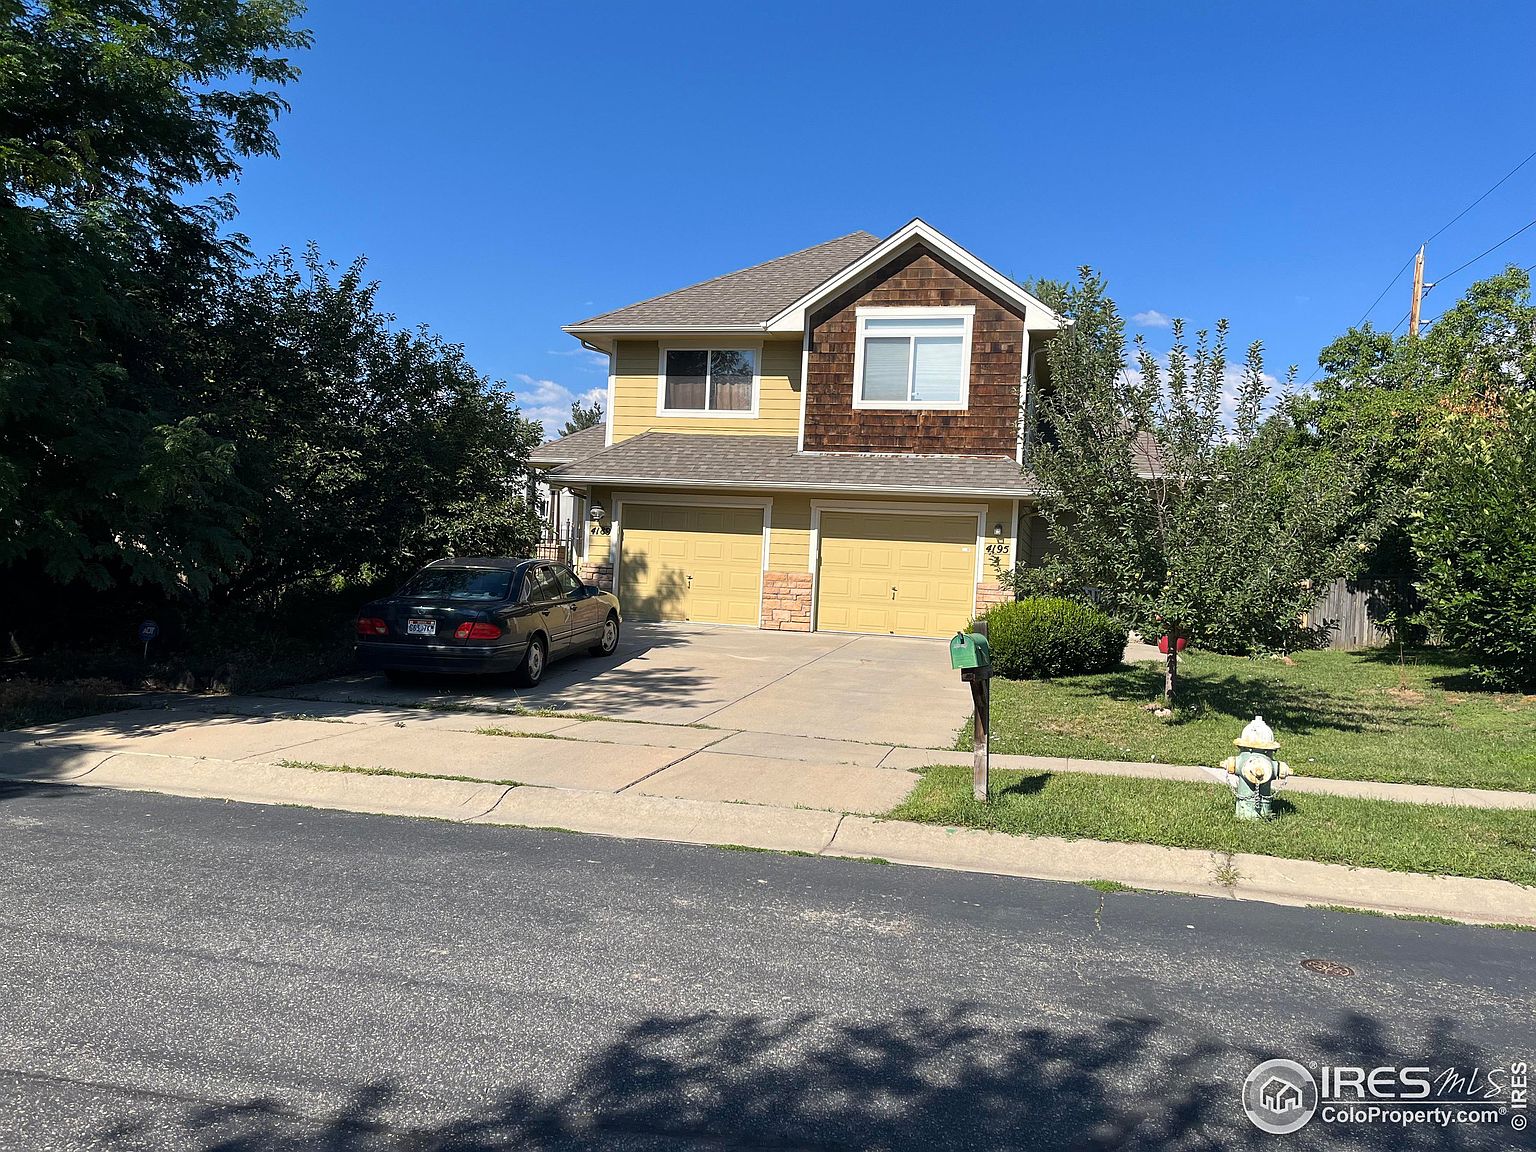 Undisclosed Address), Boulder, CO 80301 | MLS #974211 | Zillow